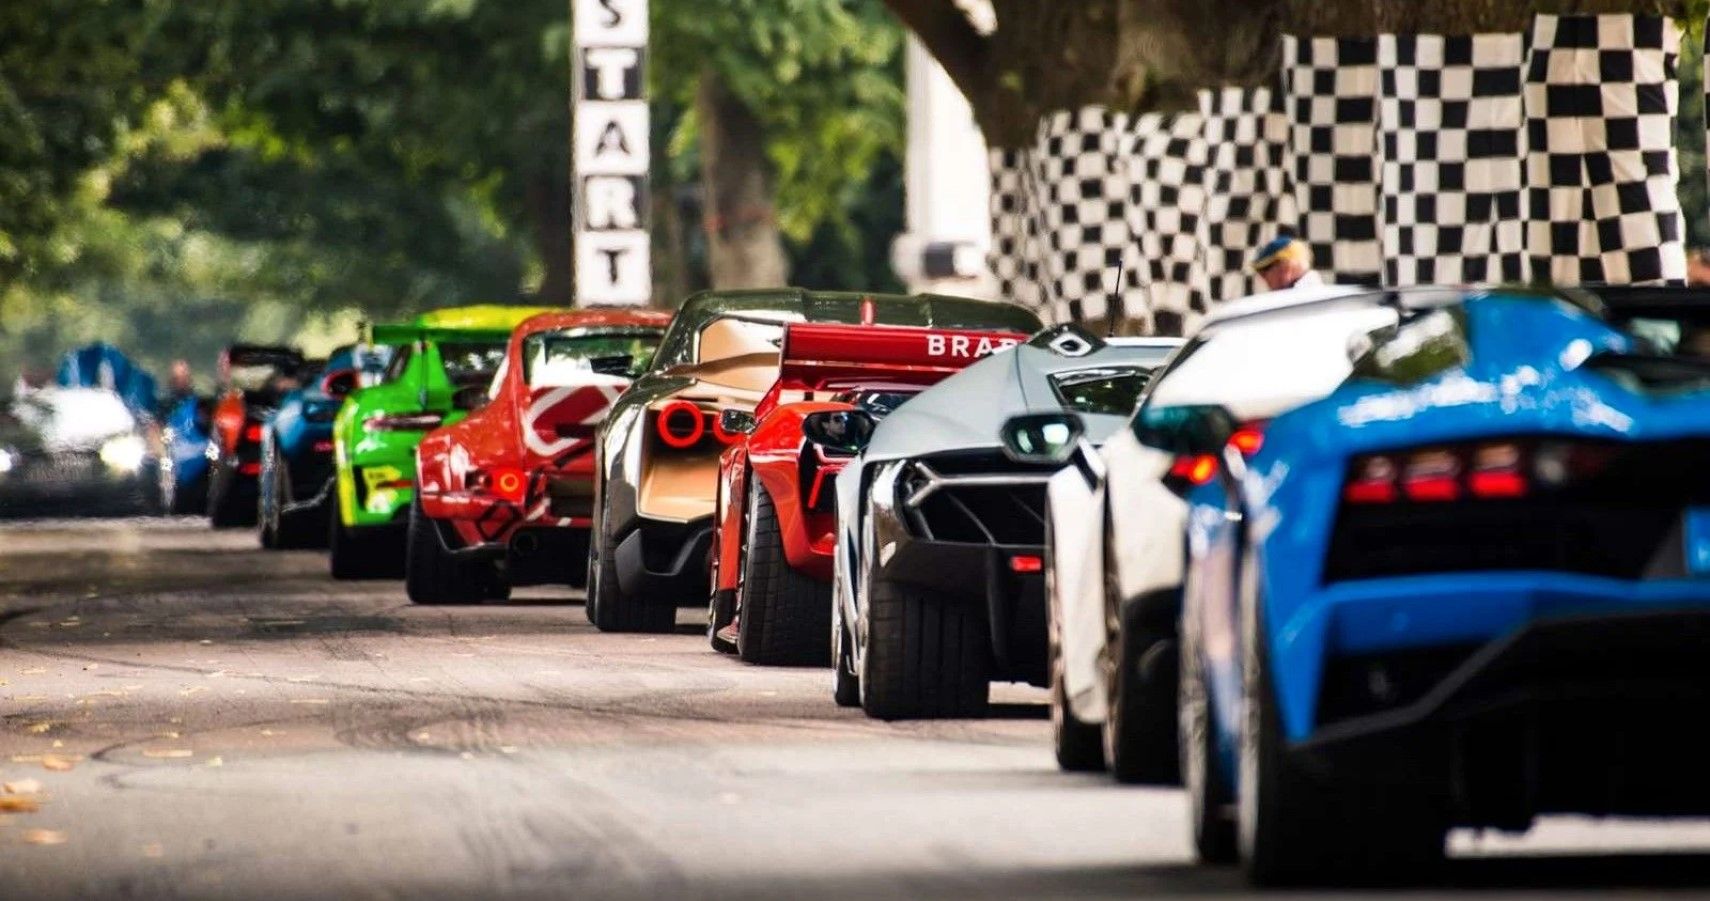 Supercars lined up at the Goodwood Festival of Speed